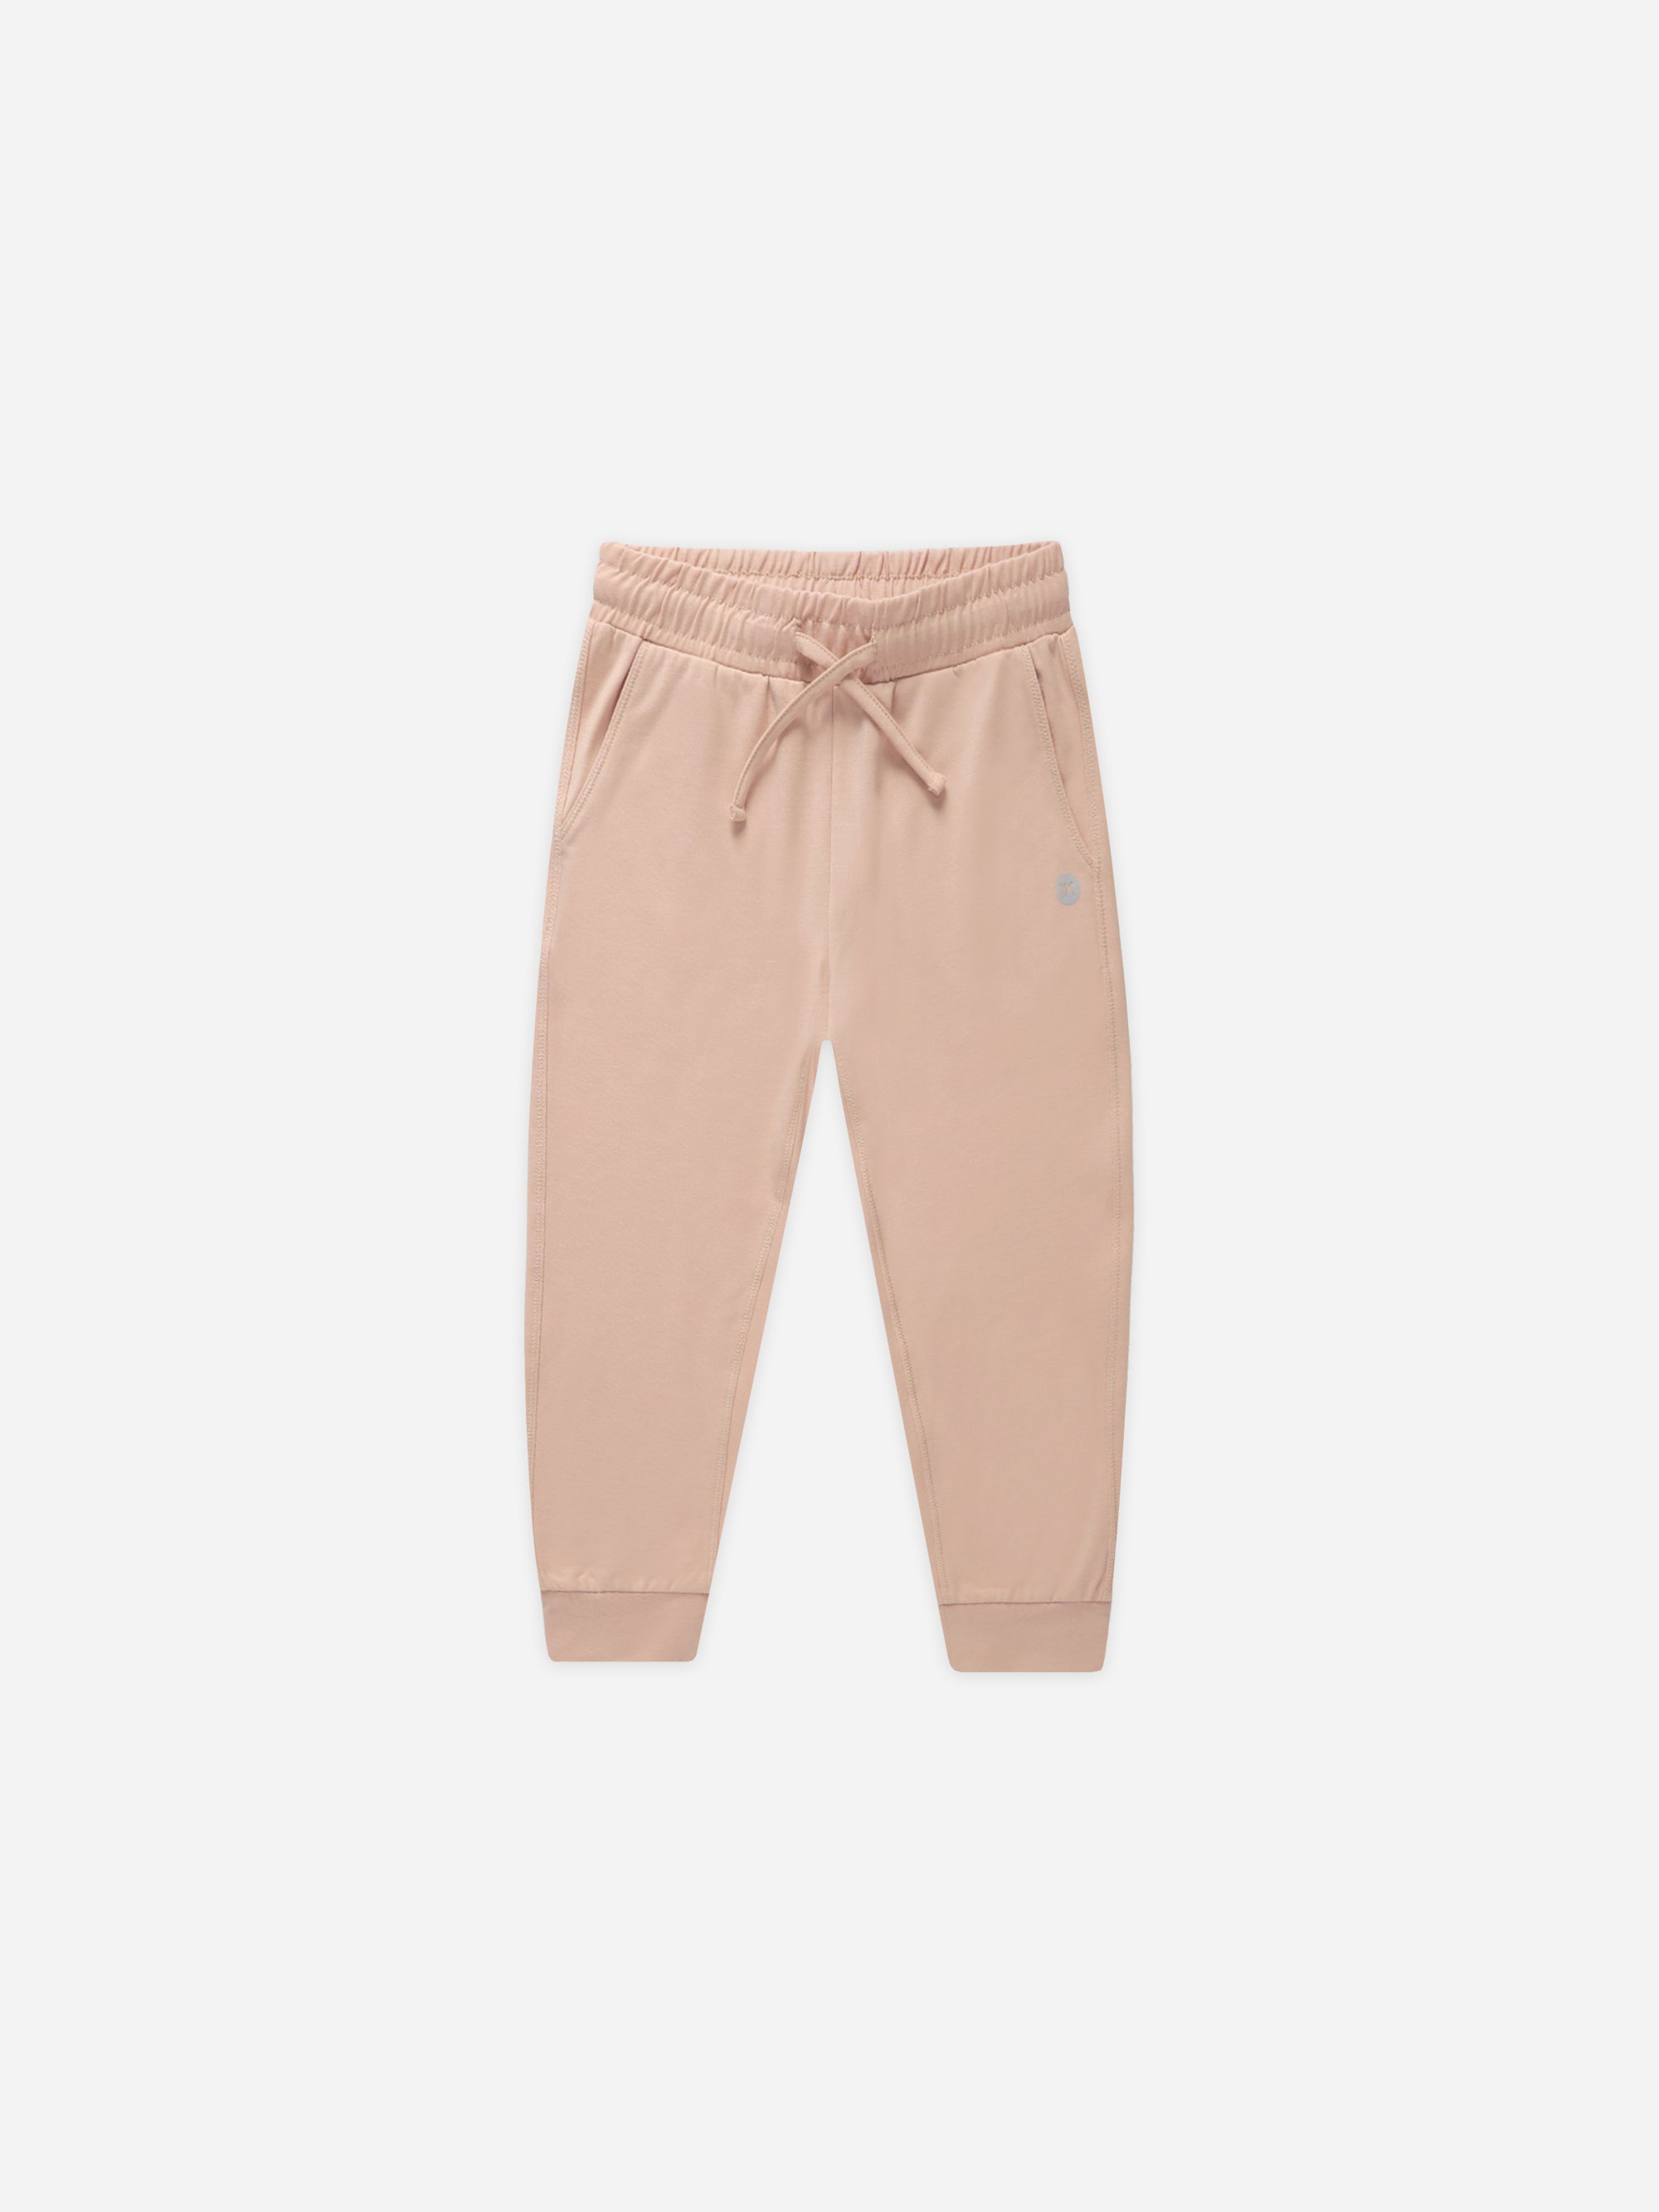 Cadence Tech Jogger || Blush - Rylee + Cru | Kids Clothes | Trendy Baby Clothes | Modern Infant Outfits |